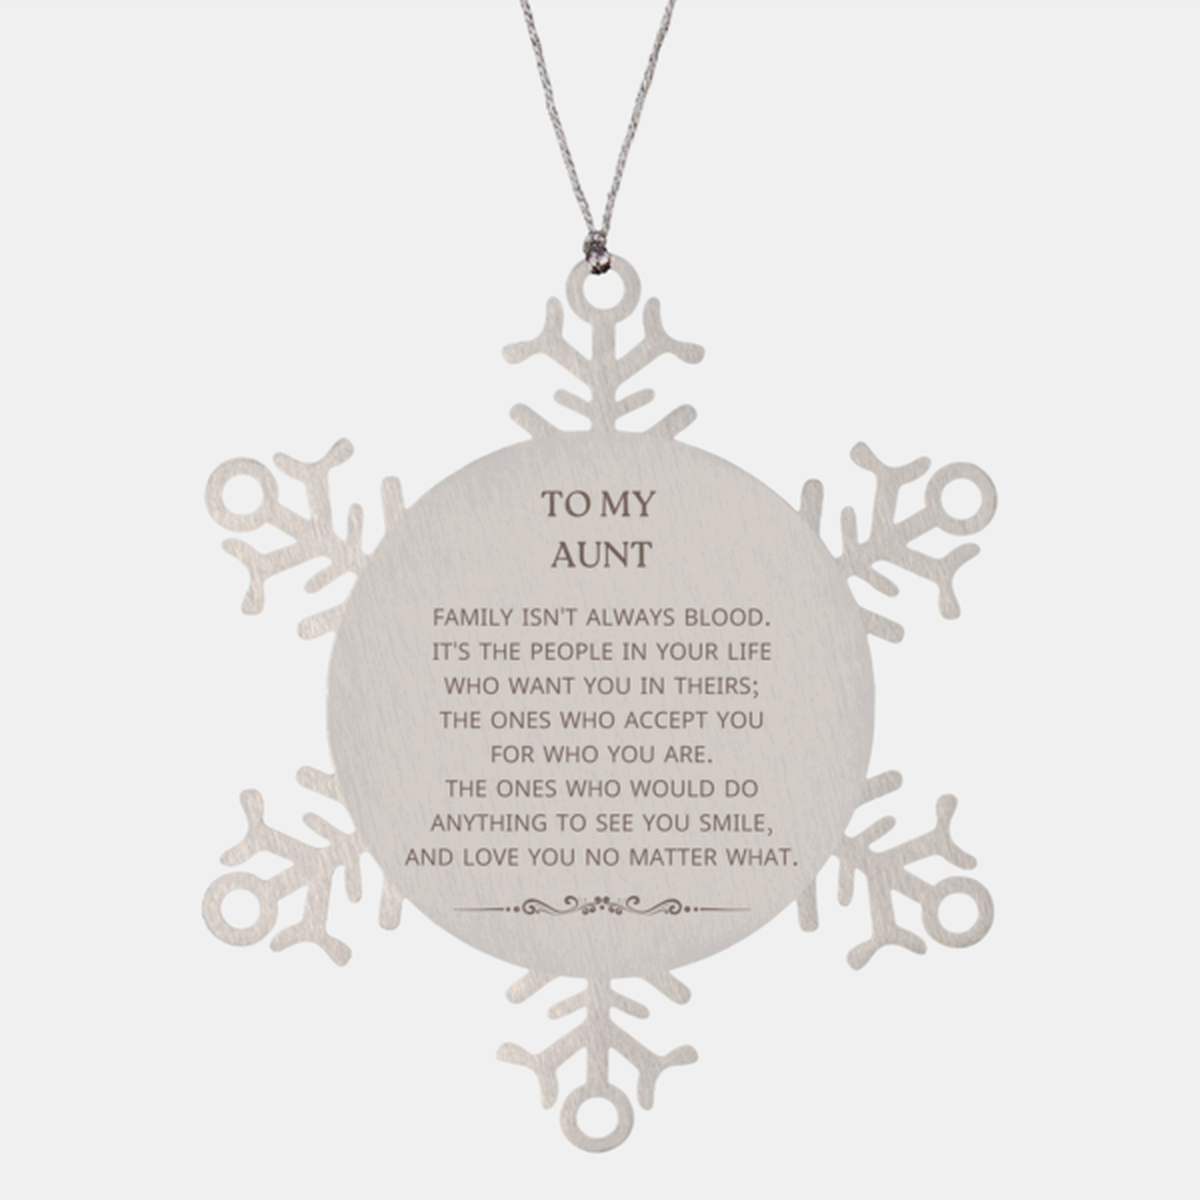 To My Aunt Gifts, Family isn't always blood, Aunt Snowflake Ornament, Birthday Christmas Unique Present For Aunt